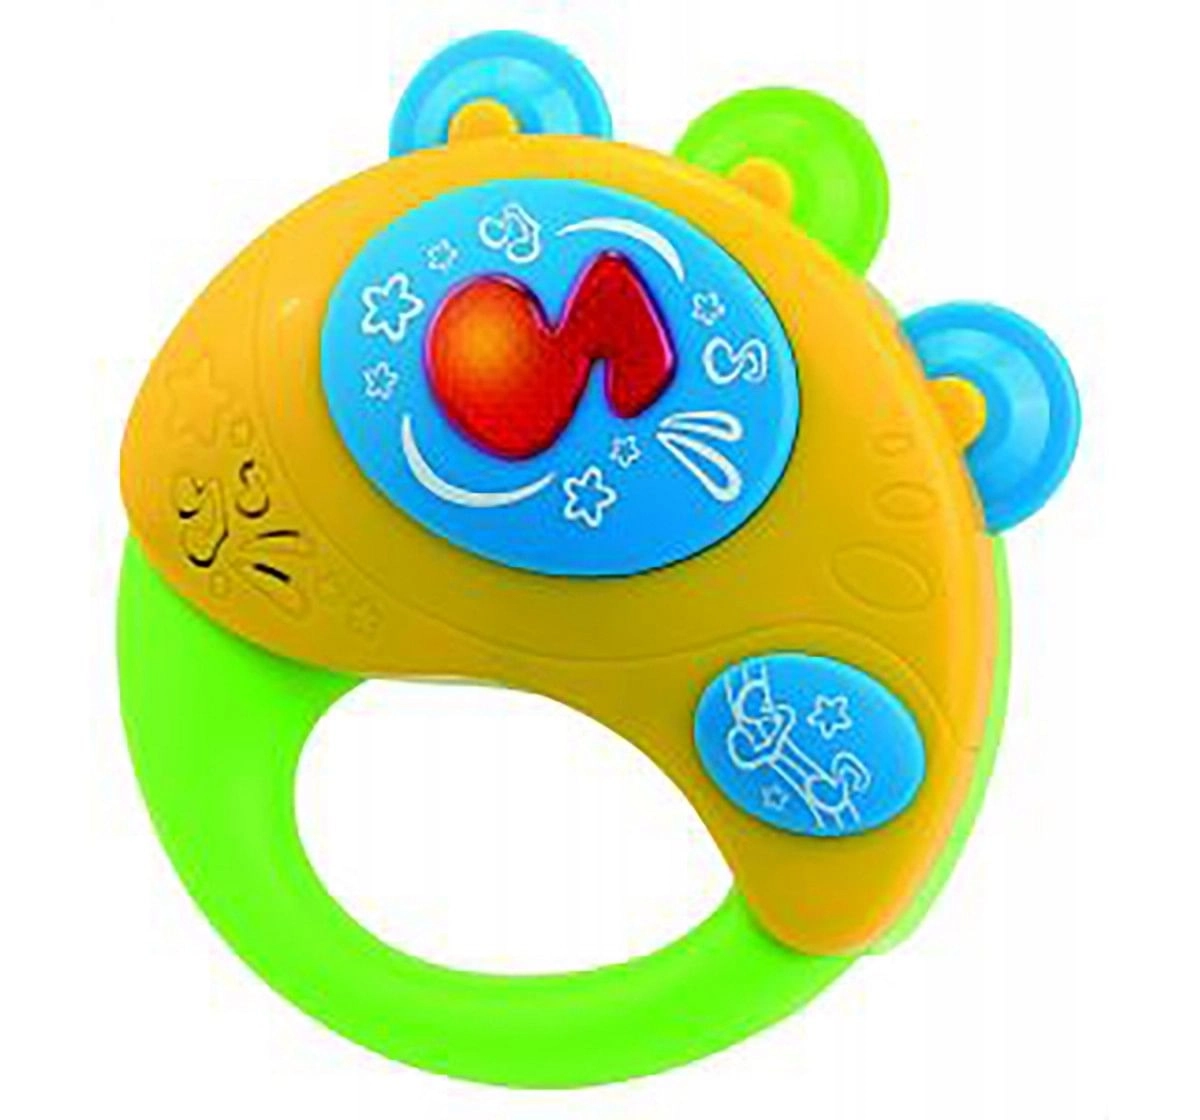 Hamleys My First Tambourine Learning Toys for Kids age 12M+ 